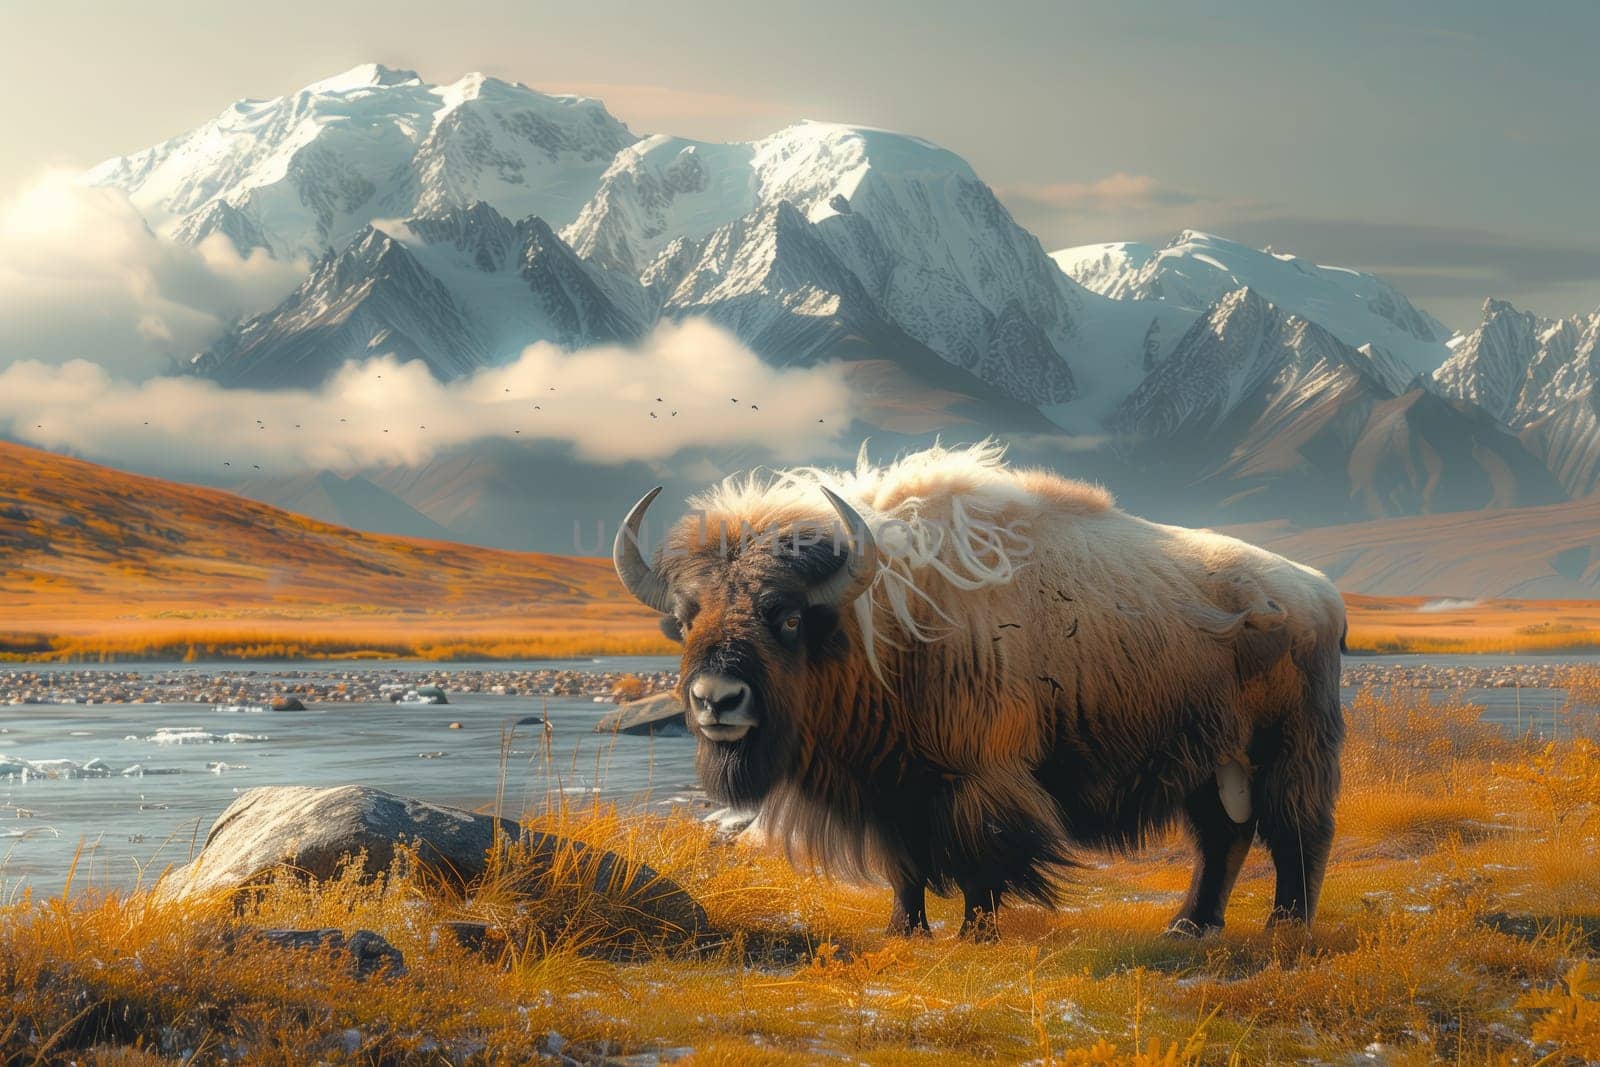 A bison is standing in an ecoregion field with mountains in the background, under a cloudy sky. The natural landscape includes water features, creating a picturesque highland view